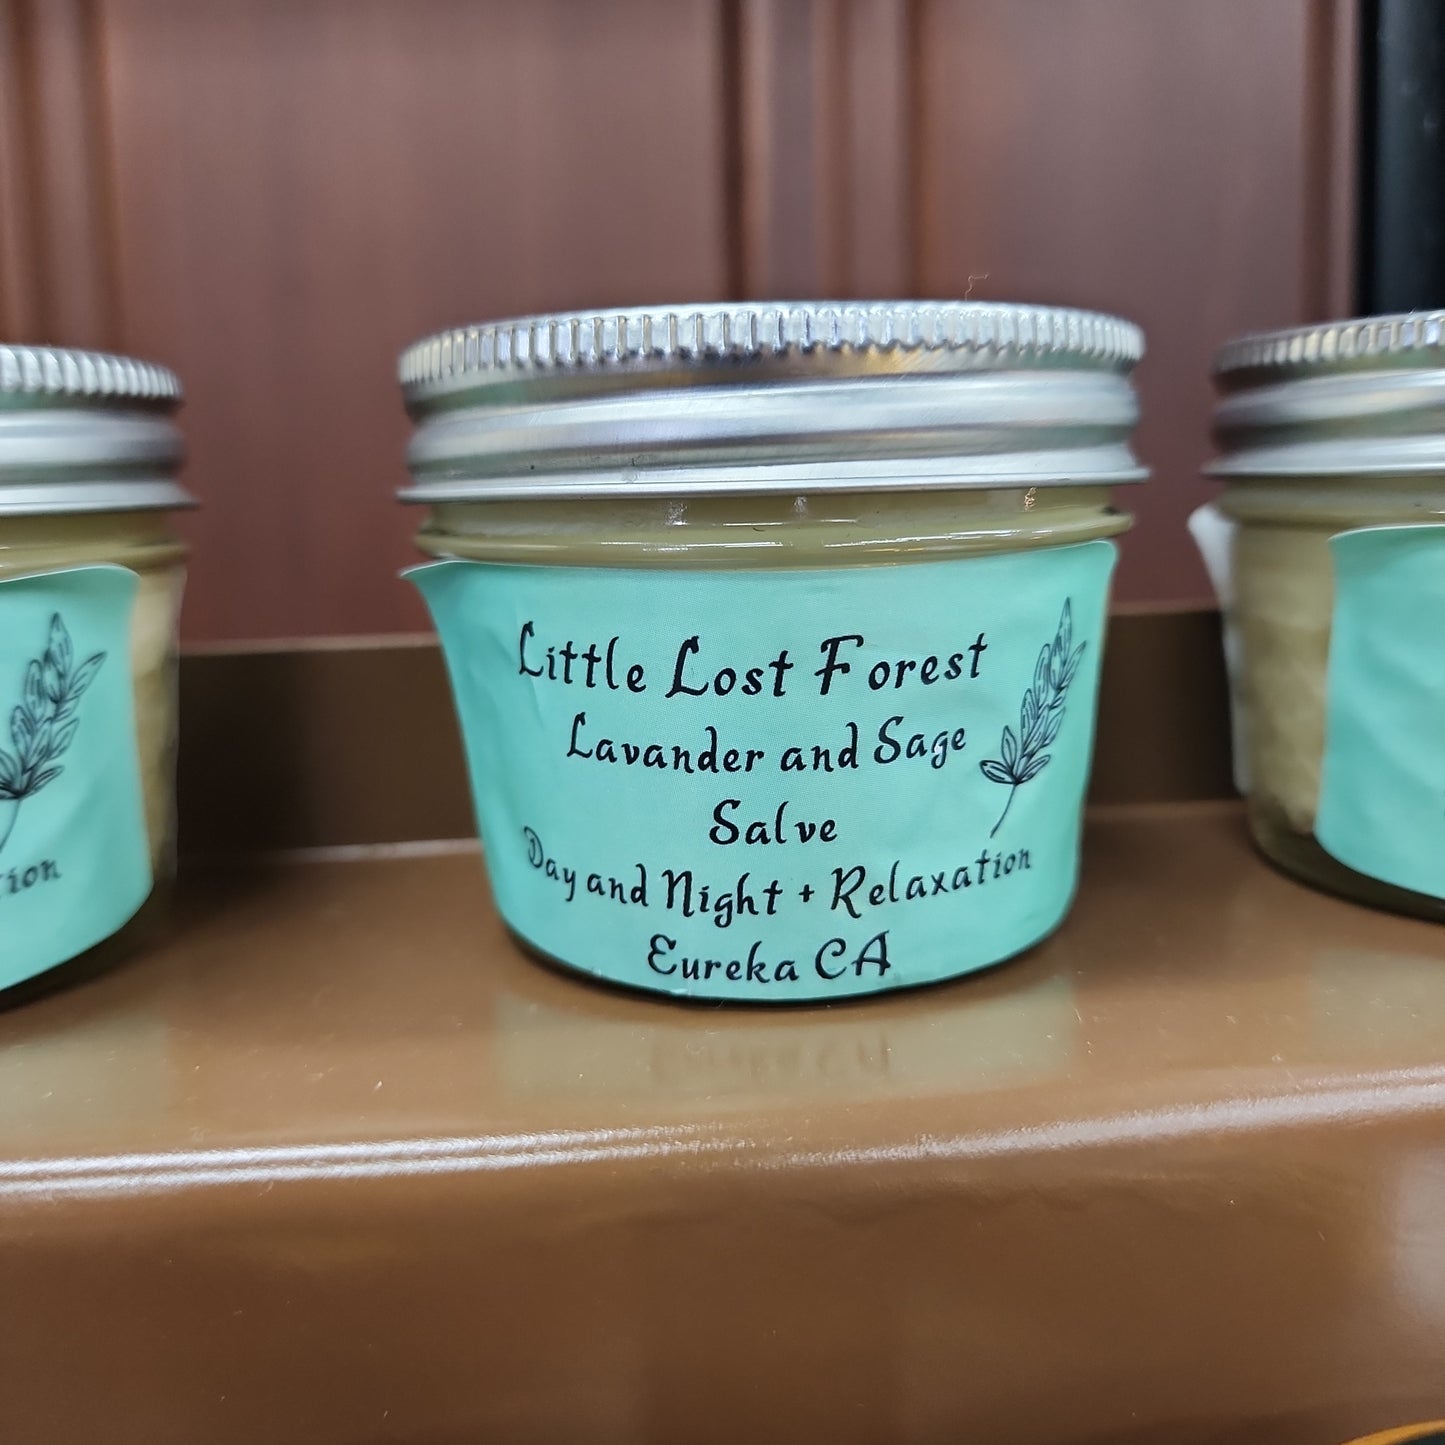 Lavender & Sage Salve | Day & Night Relaxation | Little Lost Forest